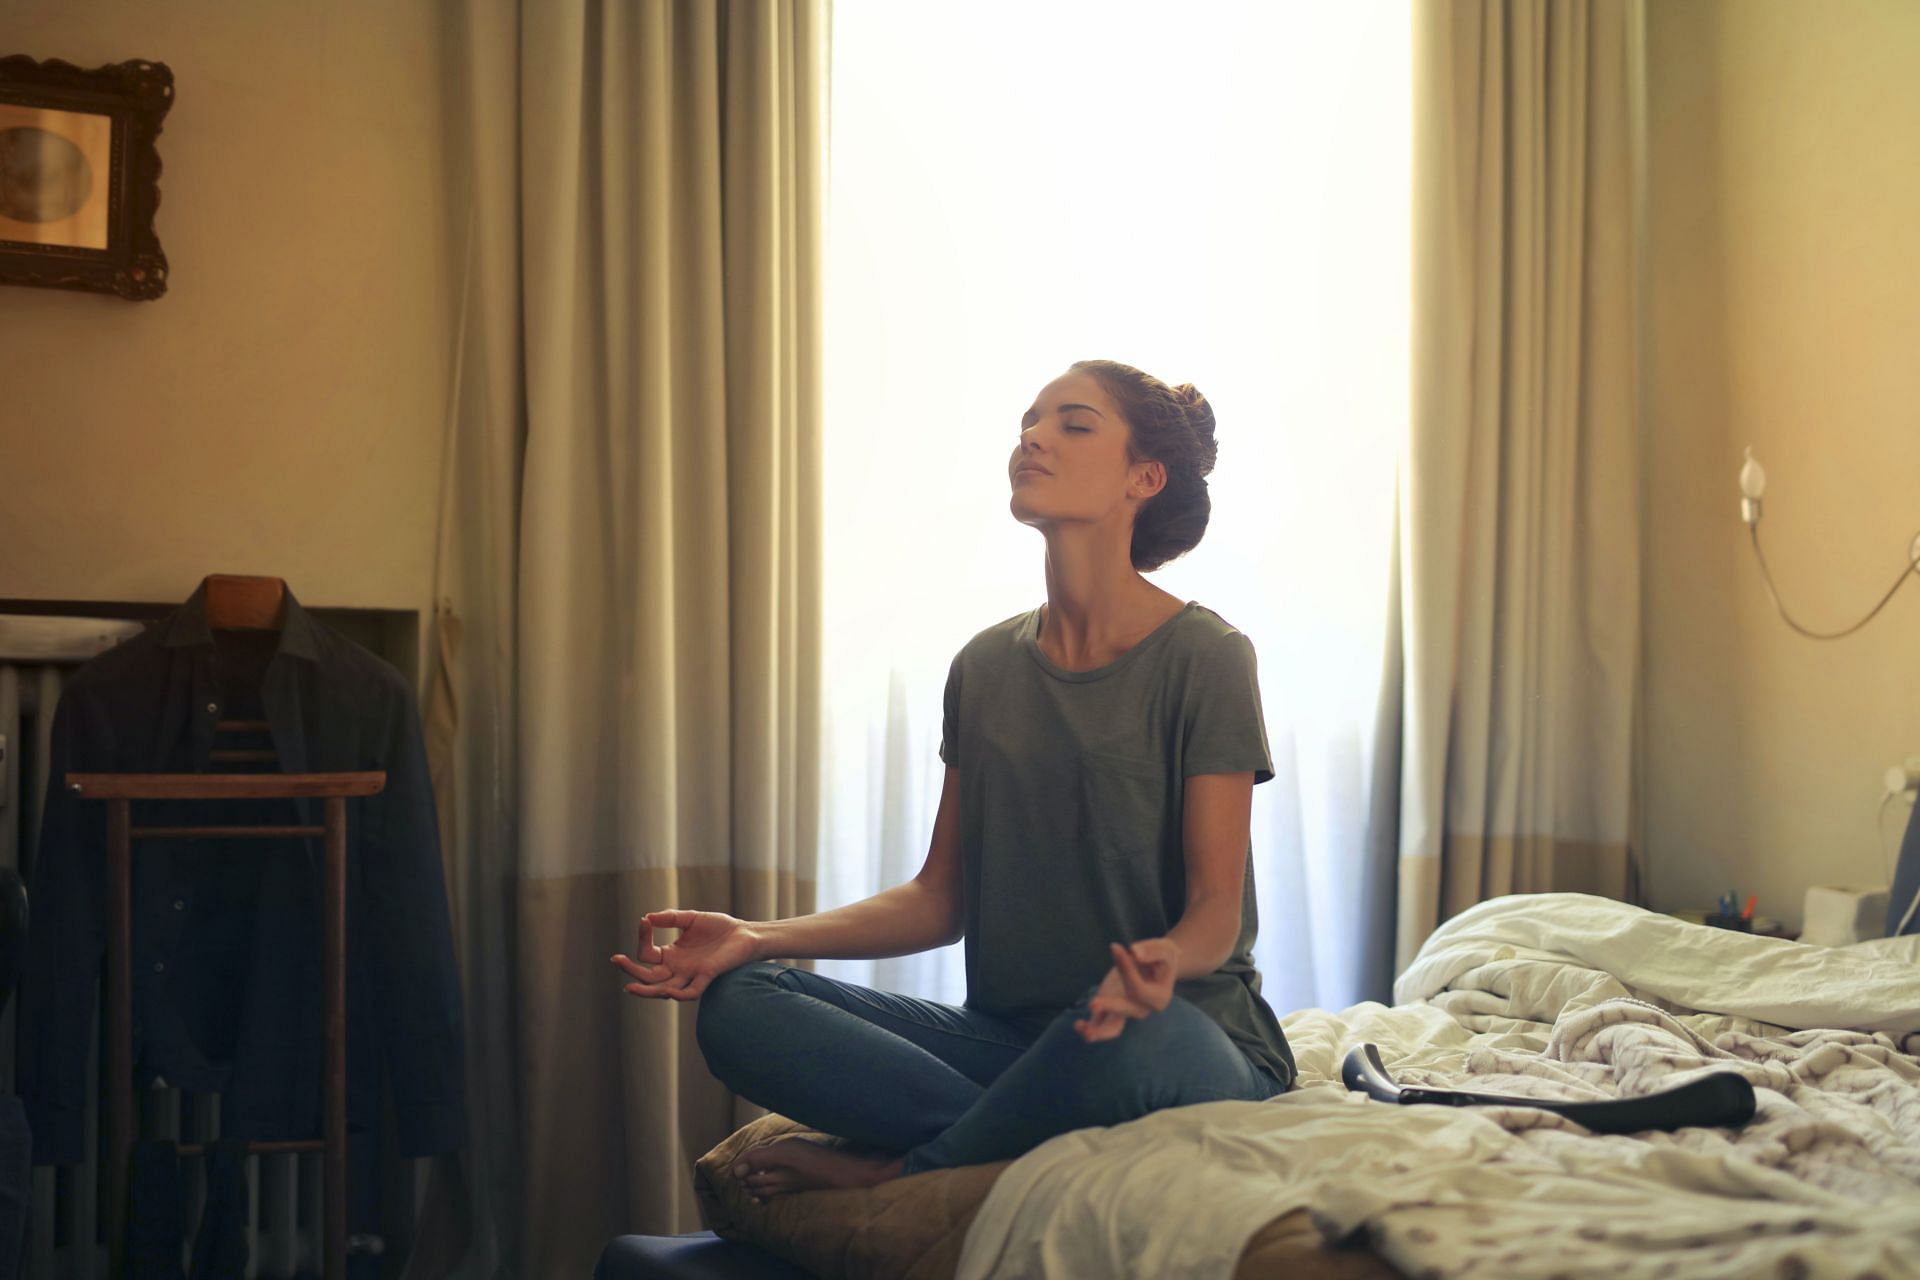 Meditating is a great way to relieve stress (Image via Pexels/Andrea Piacquadio)